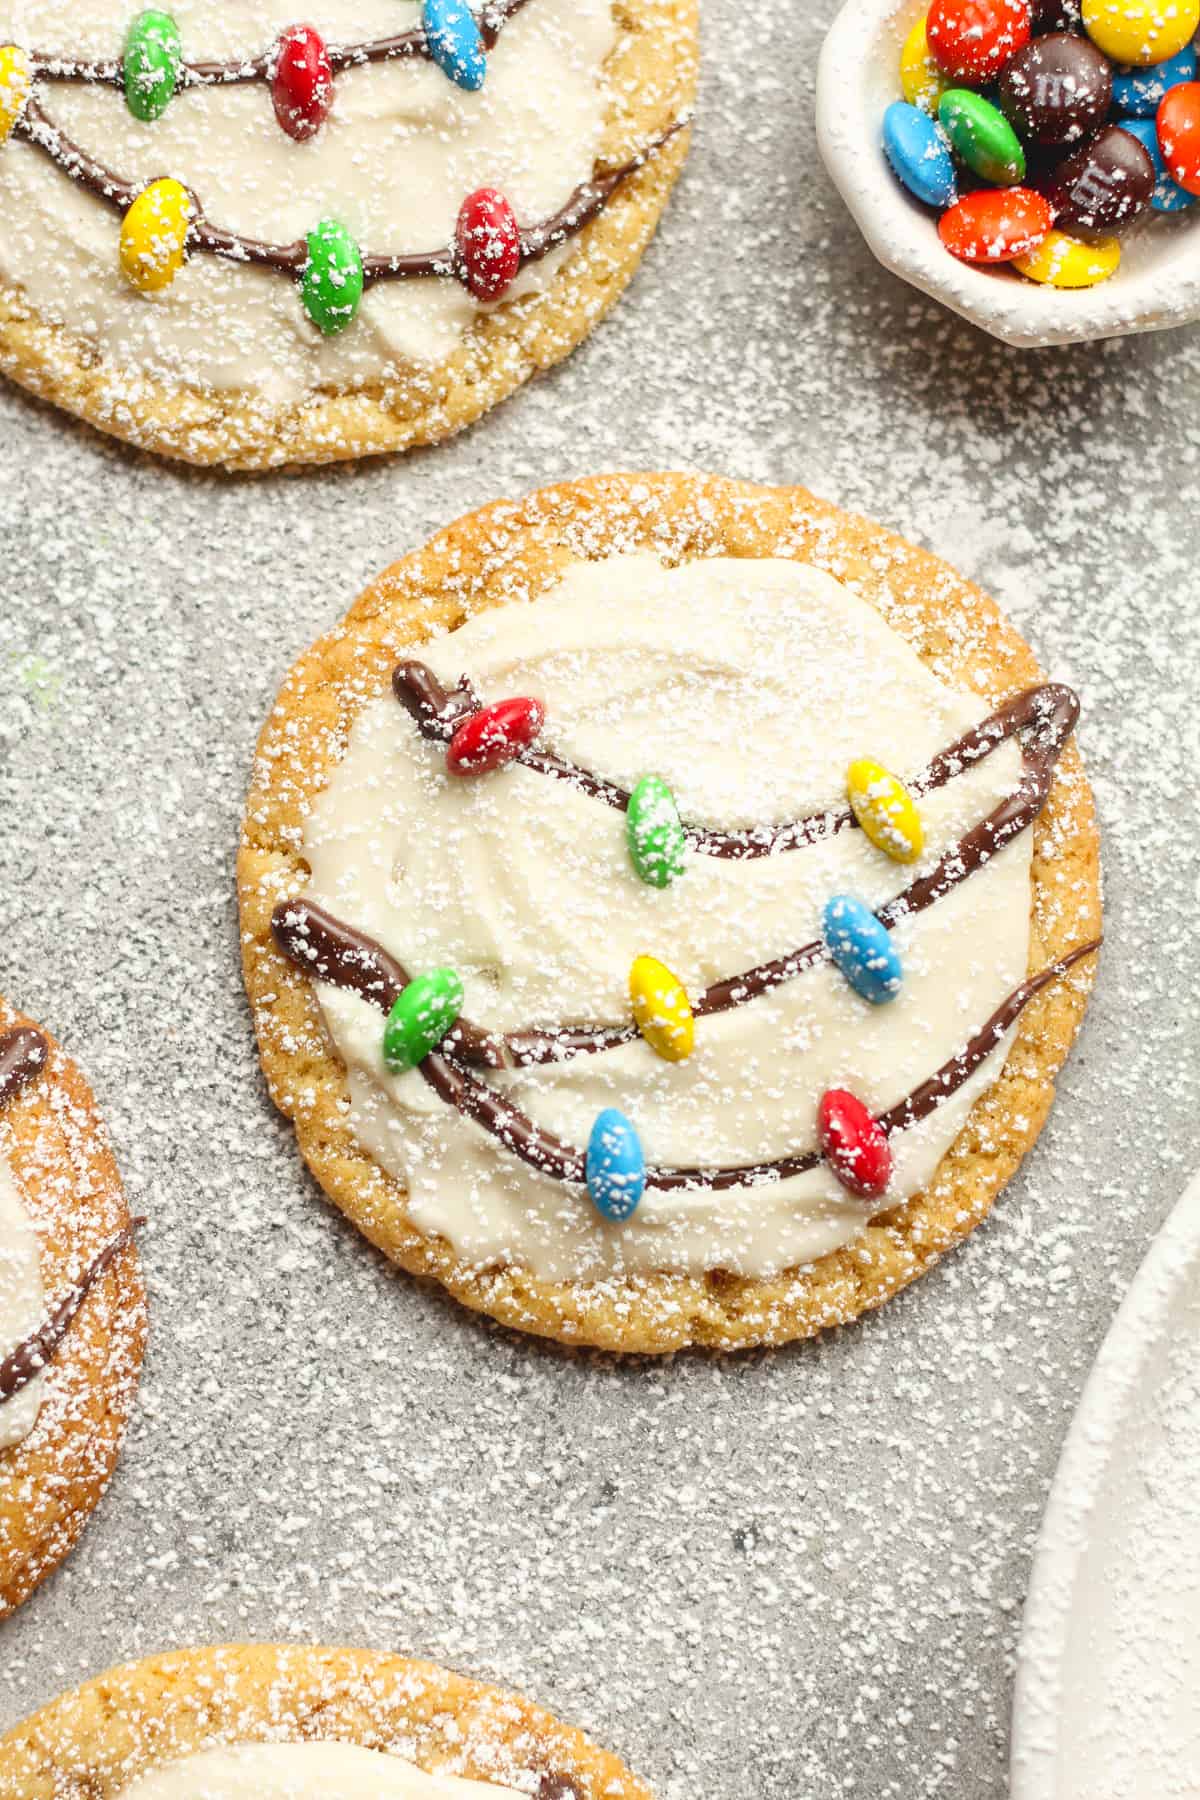 A sugar cookie with white icing and a string of lights.